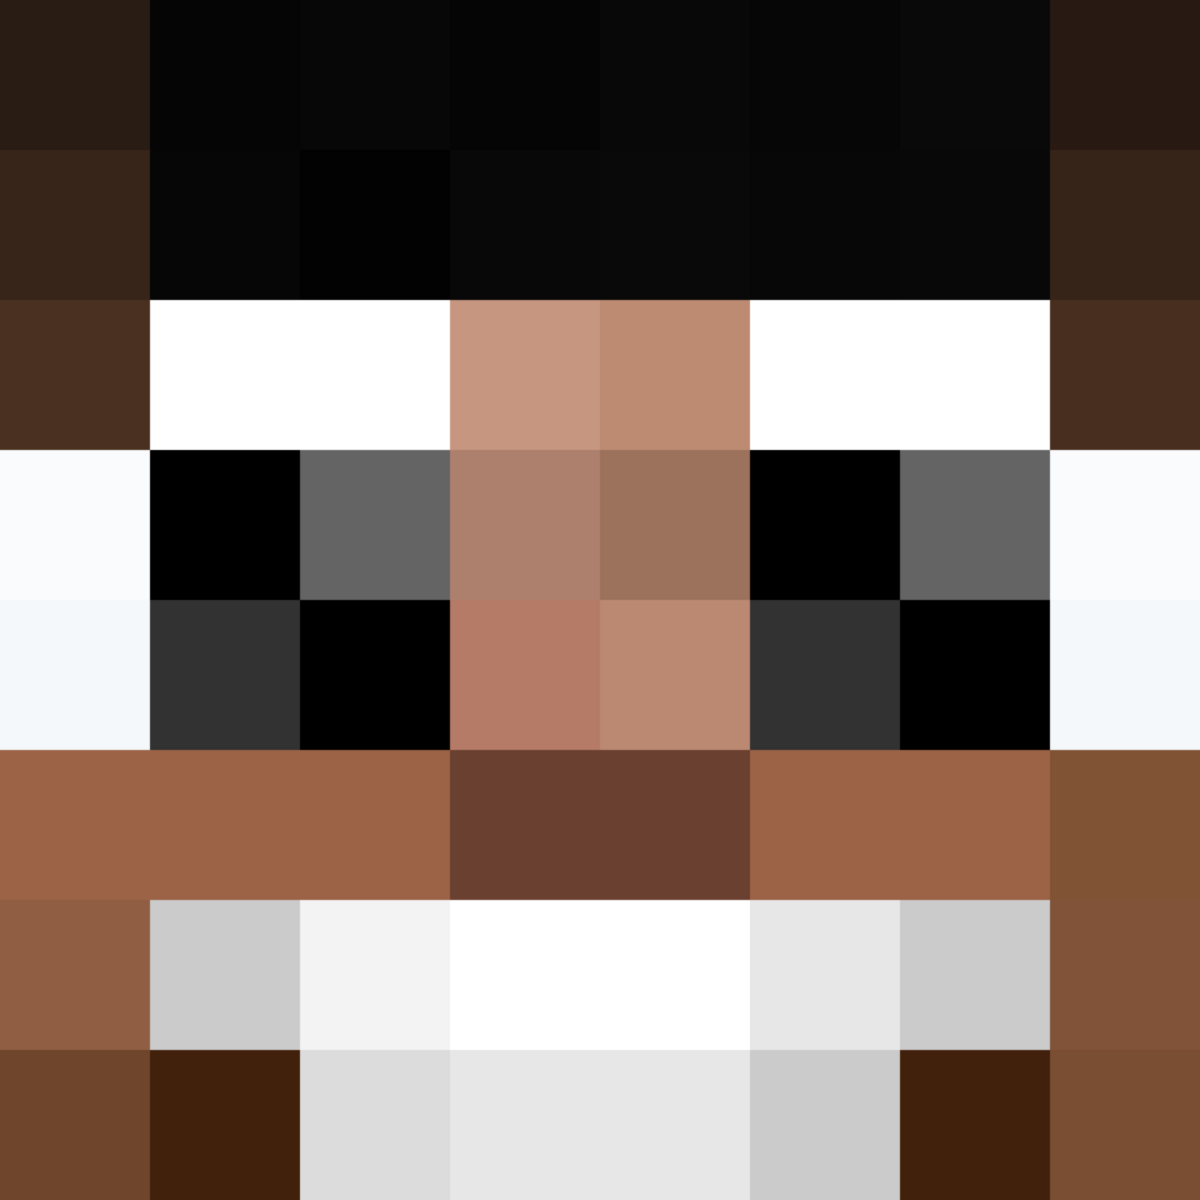 5-minecraft-youtubers-adult-players-can-enjoy